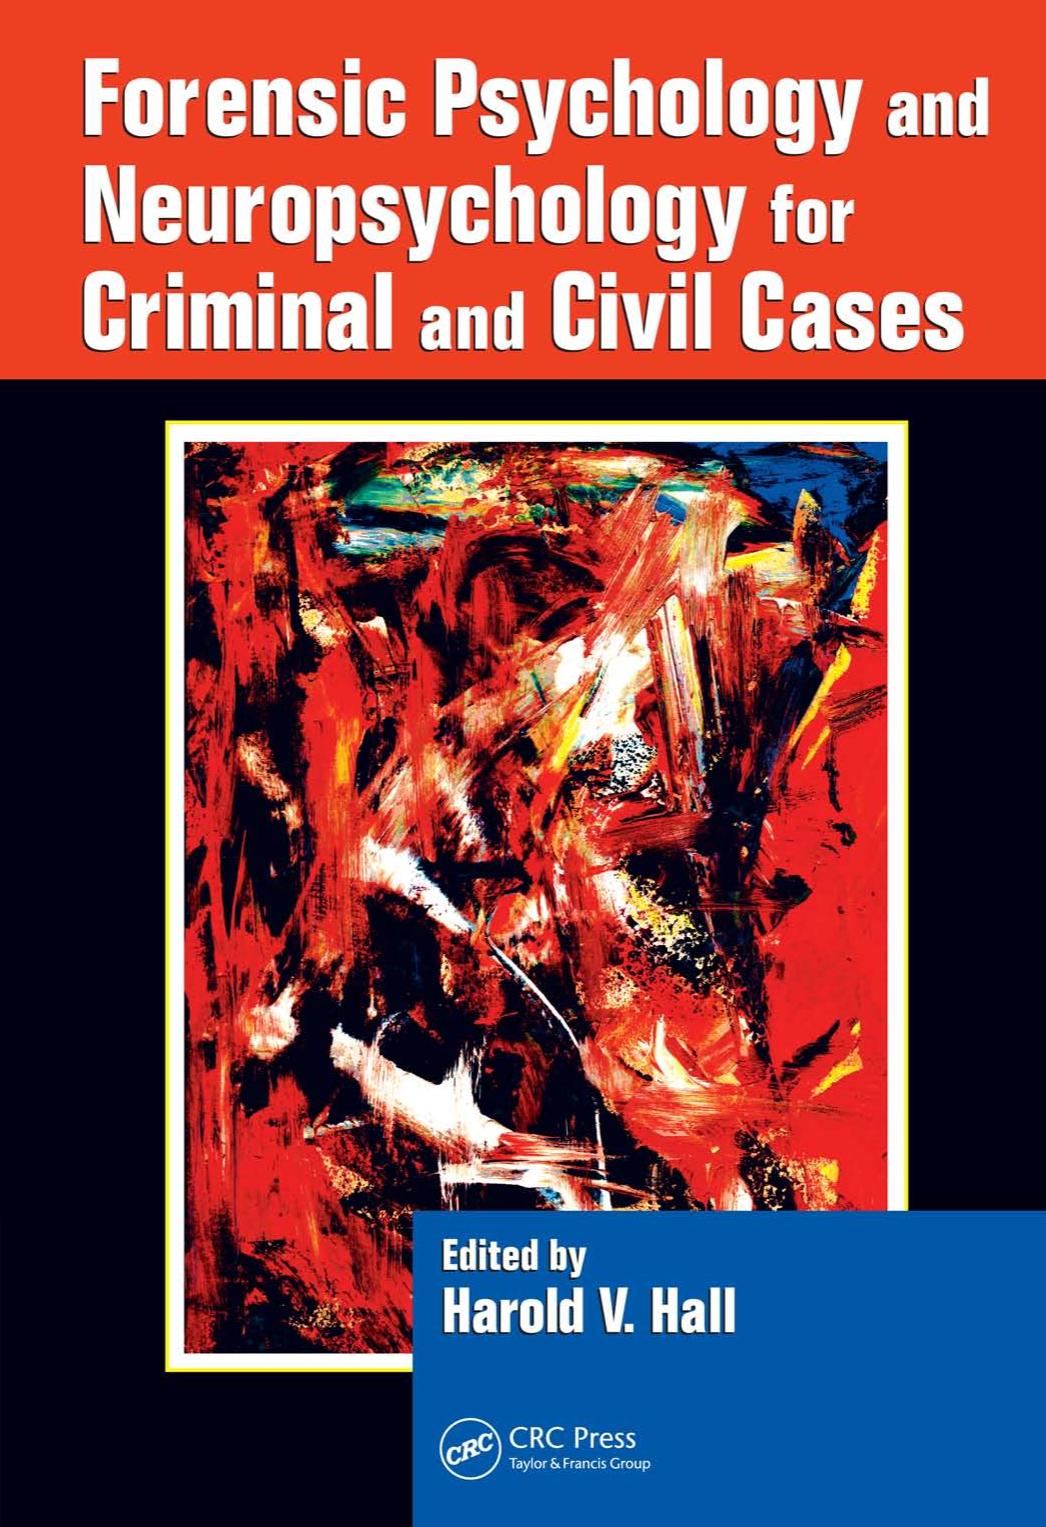 Forensic psychology and neuropsychology for criminal and civil cases